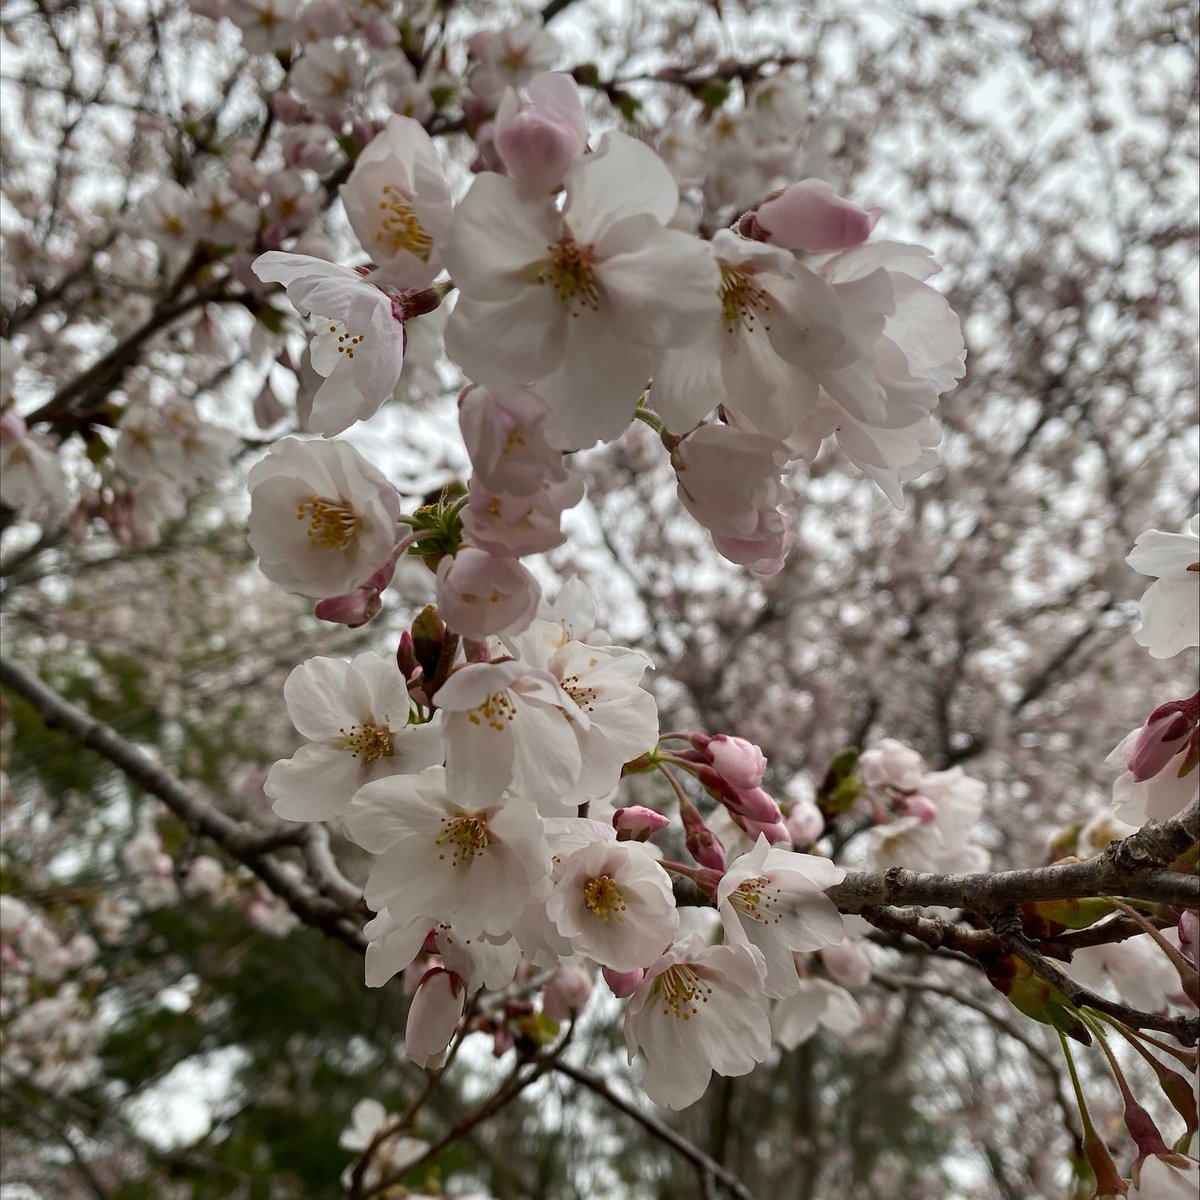 The Arboretum’s Sakura Cherry trees (Prunus × yedoensis) are blooming! These ornamental flowering cherry trees can be found in the grove by the OAC '56 Park in the Garden, between the Italian Garden & David G. Porter Memorial Japanese Garden! #UoGArboretum #UofG #Guelph #Trees